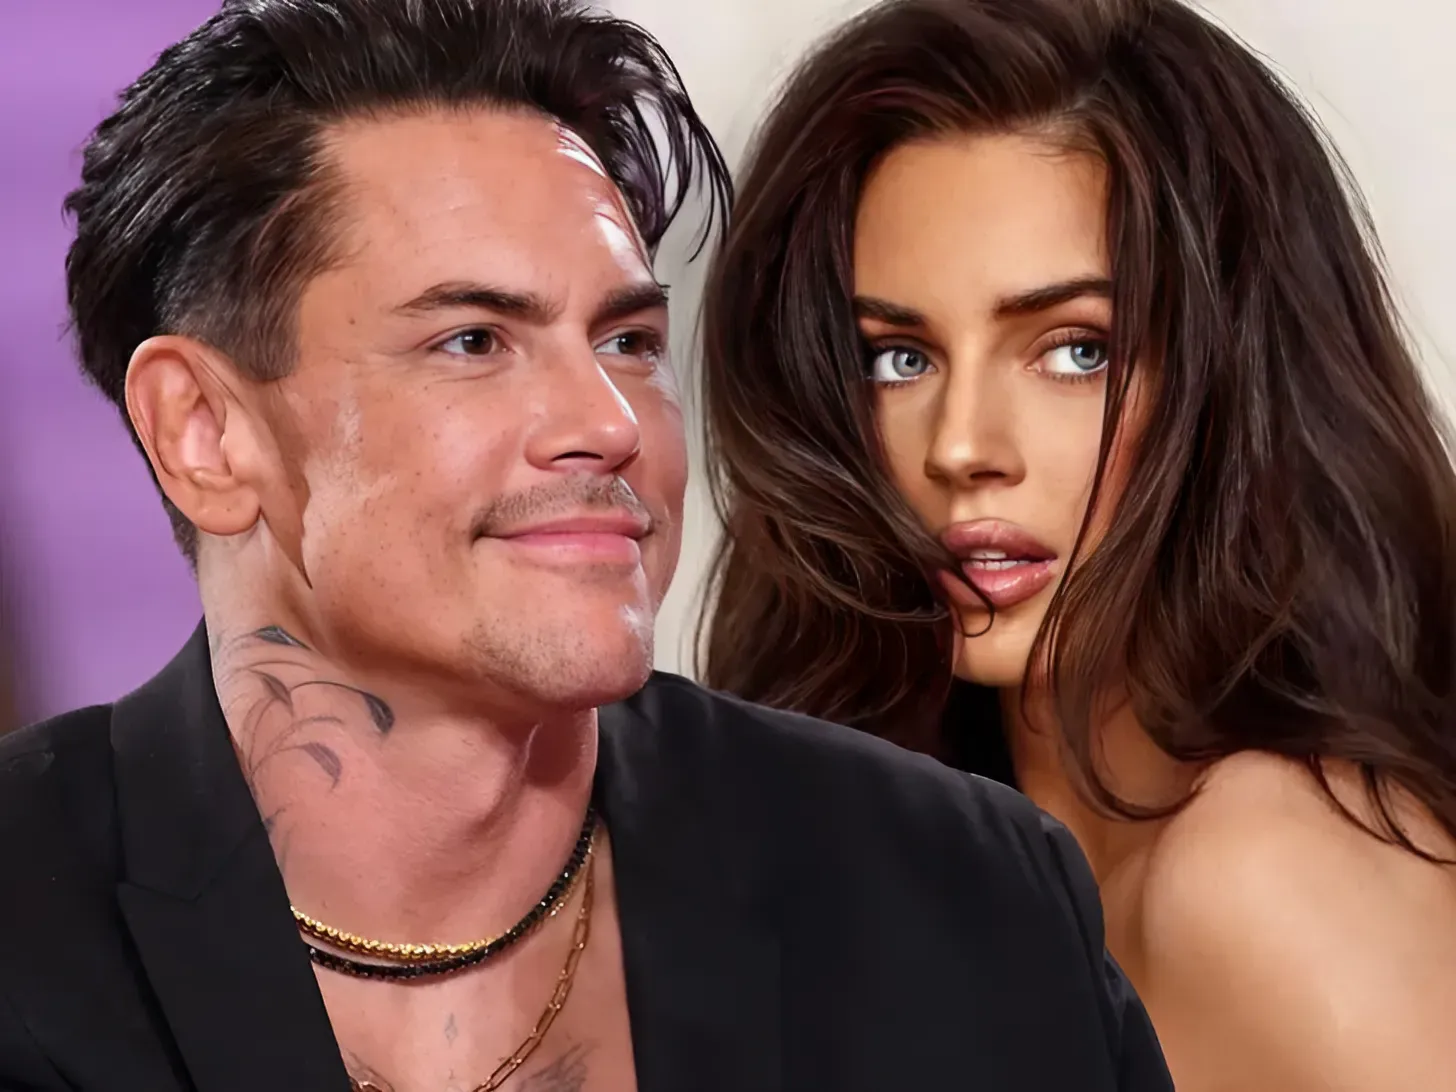 VPR Personality Says Tom Sandoval Has Already Cheated on New Girlfriend